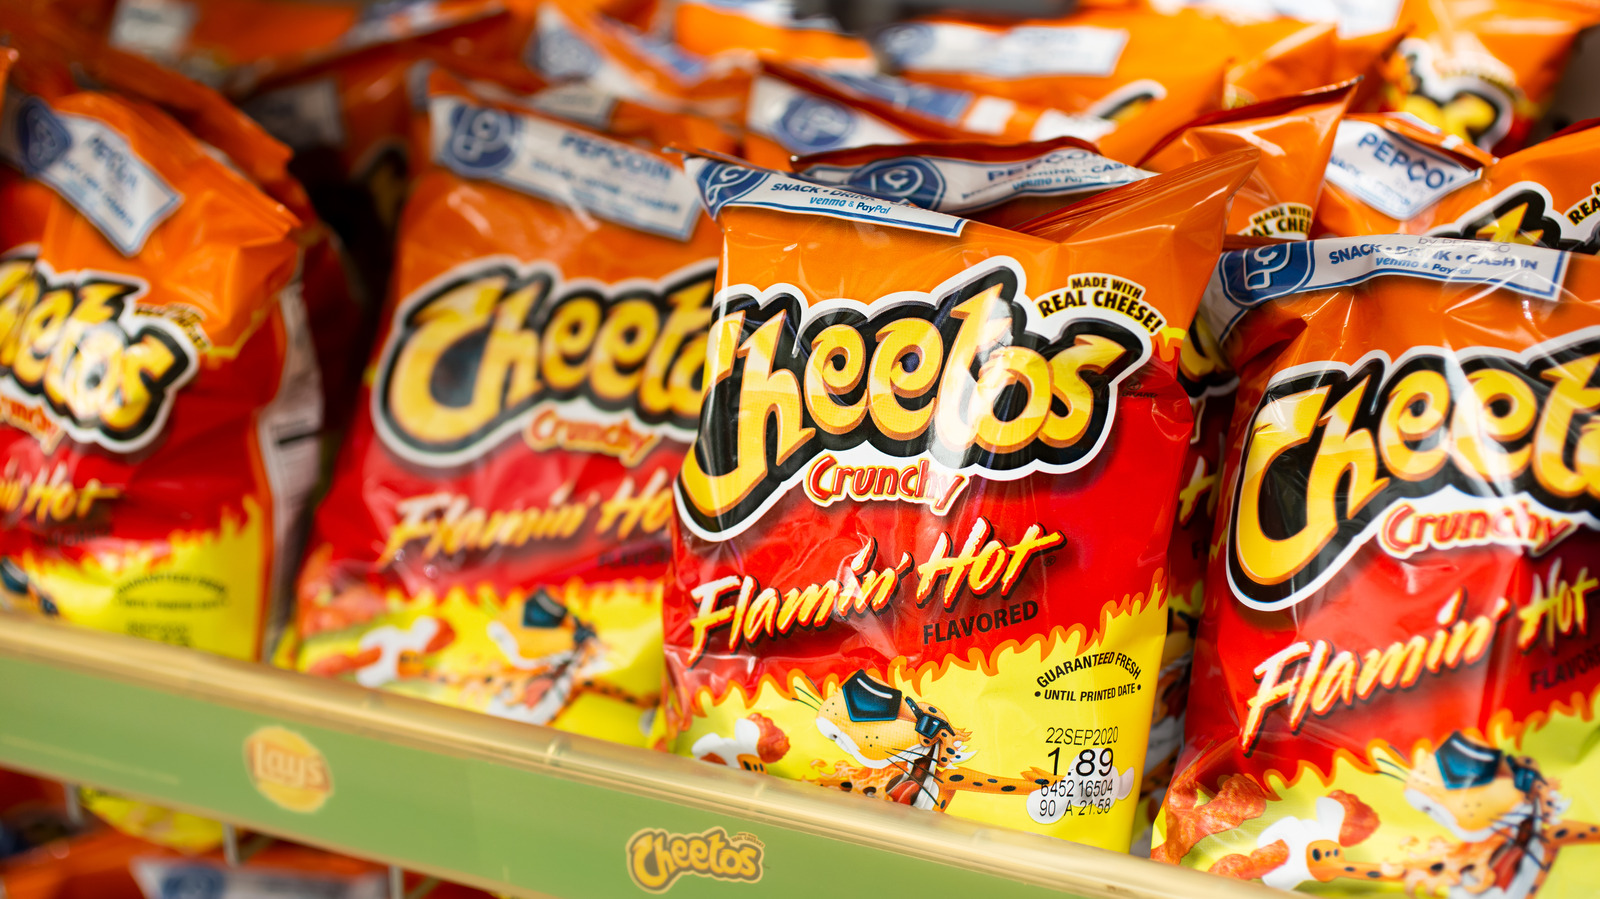 https://www.thedailymeal.com/img/gallery/the-new-cheetos-blender-is-specifically-made-to-produce-that-famous-orange-dust/l-intro-1668793736.jpg